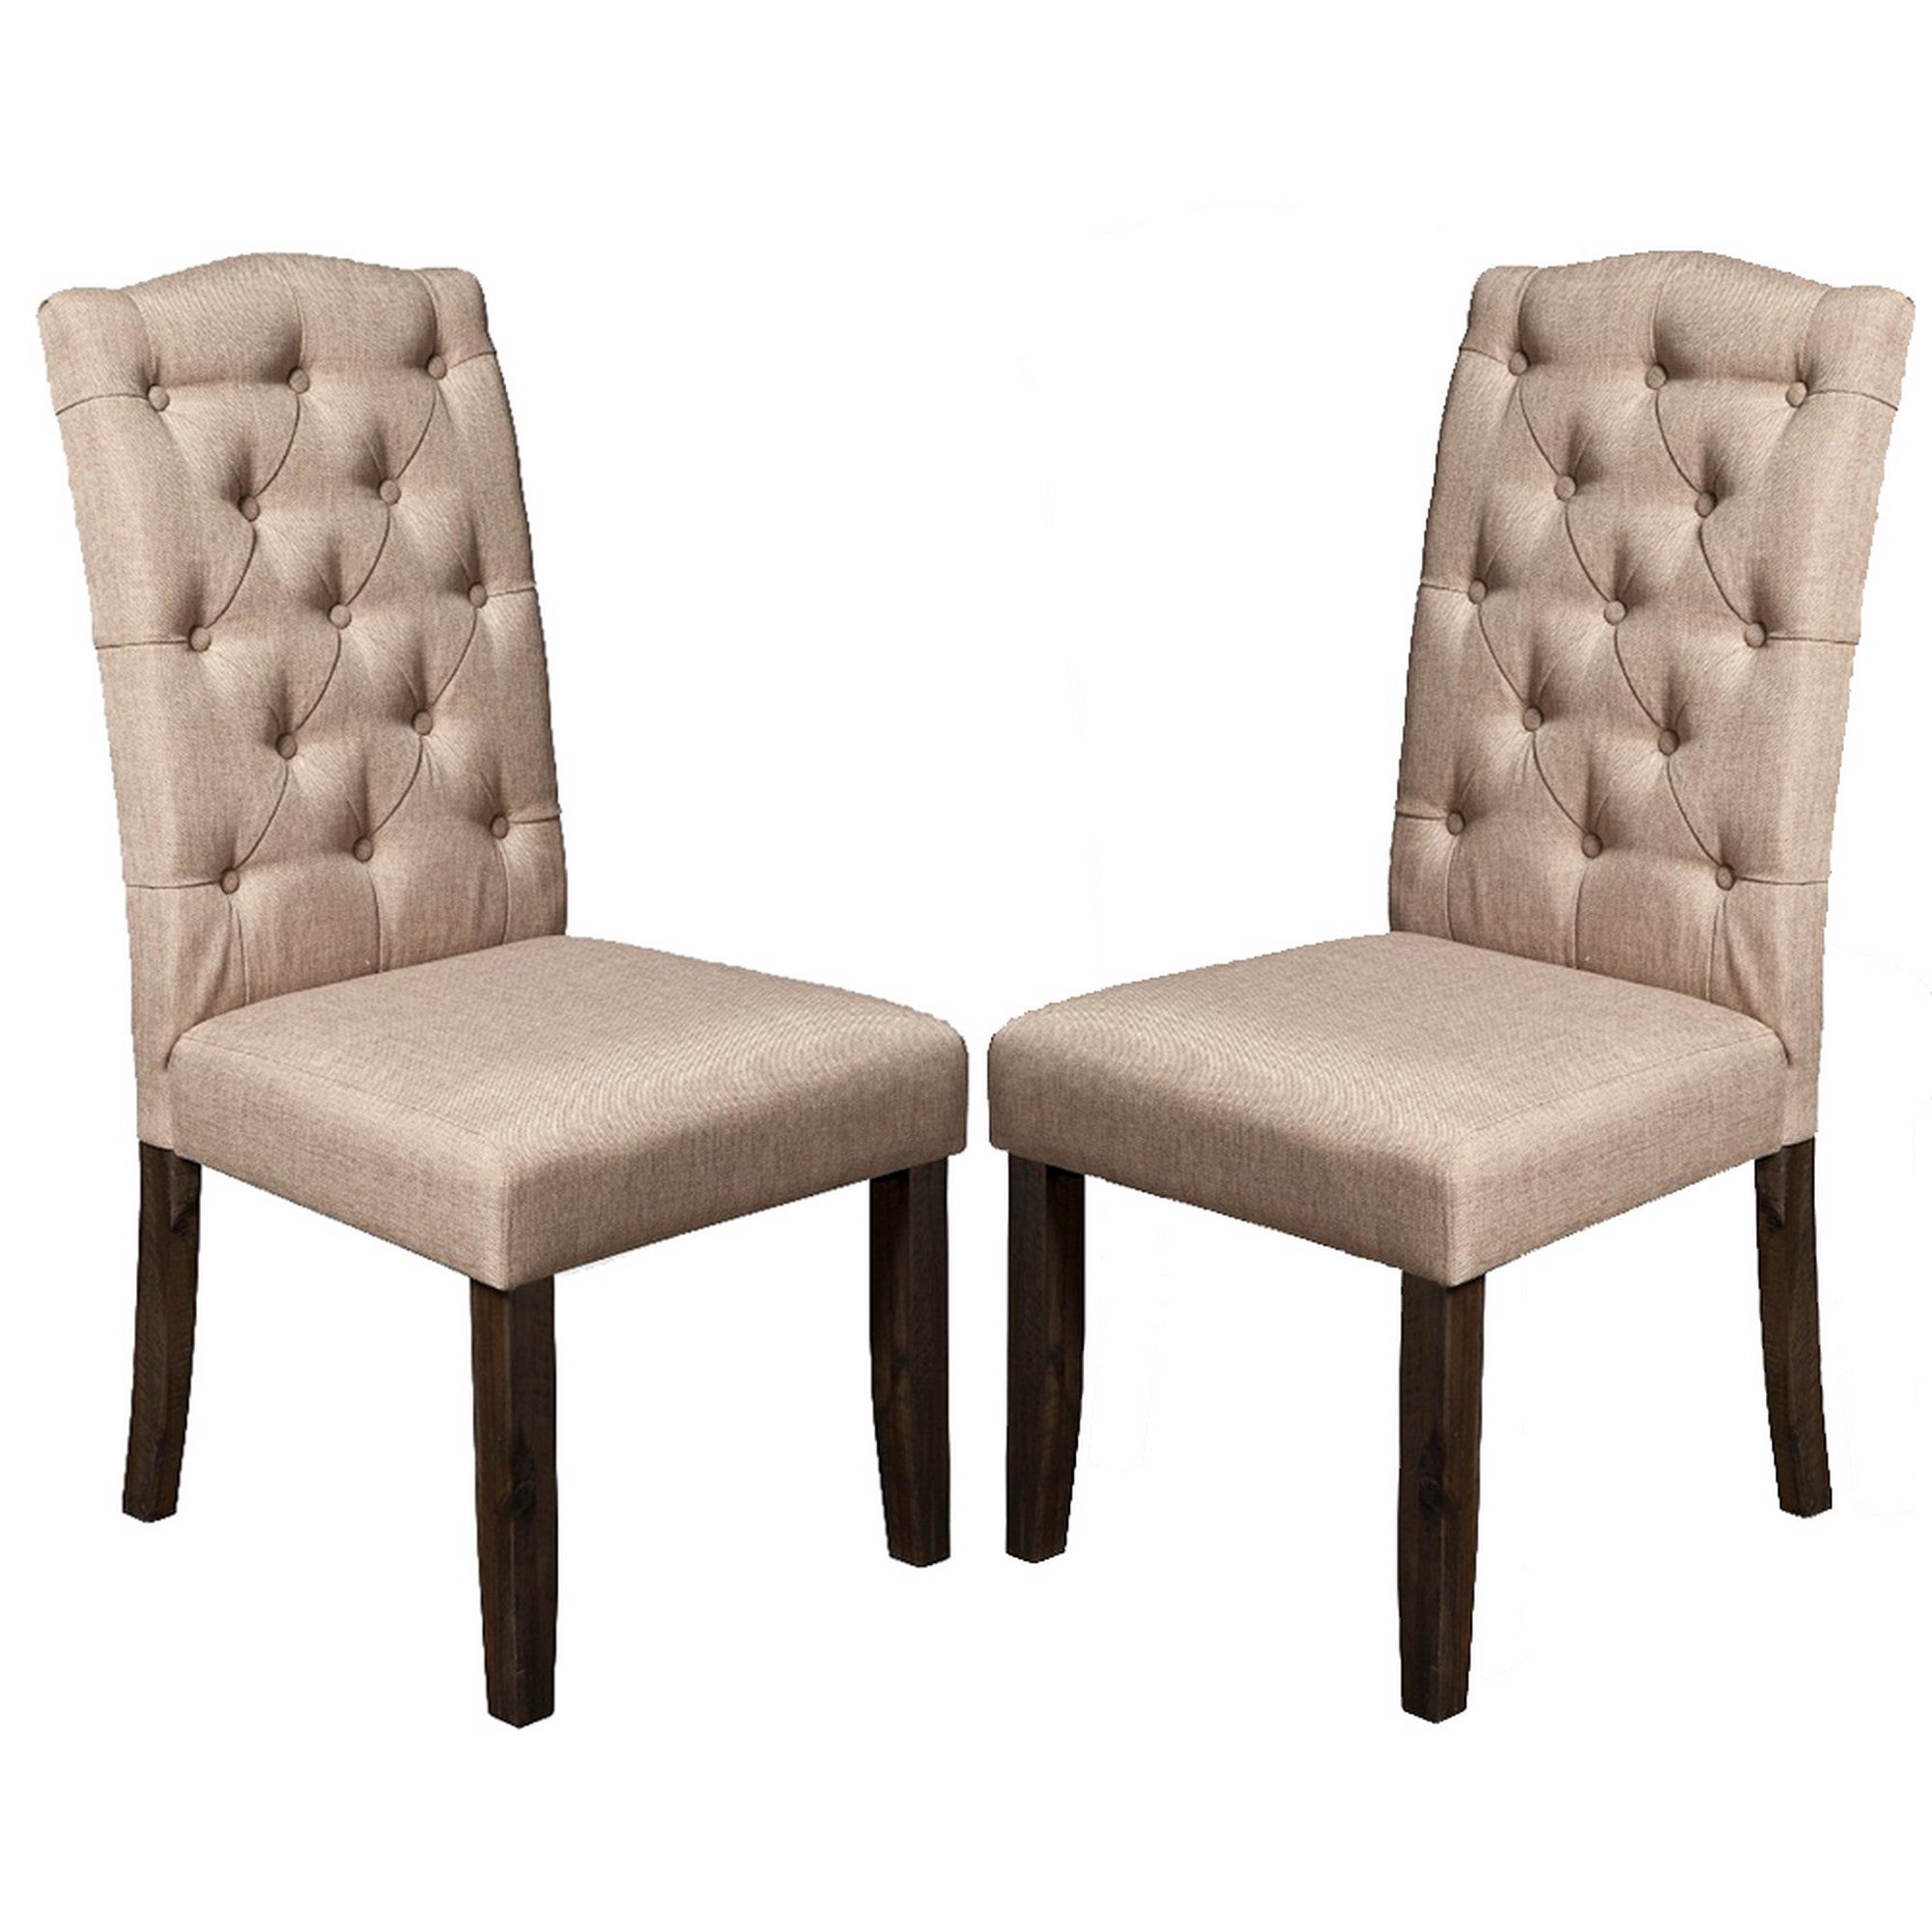 Set of 2 Button Tufted Parson Chairs Beige